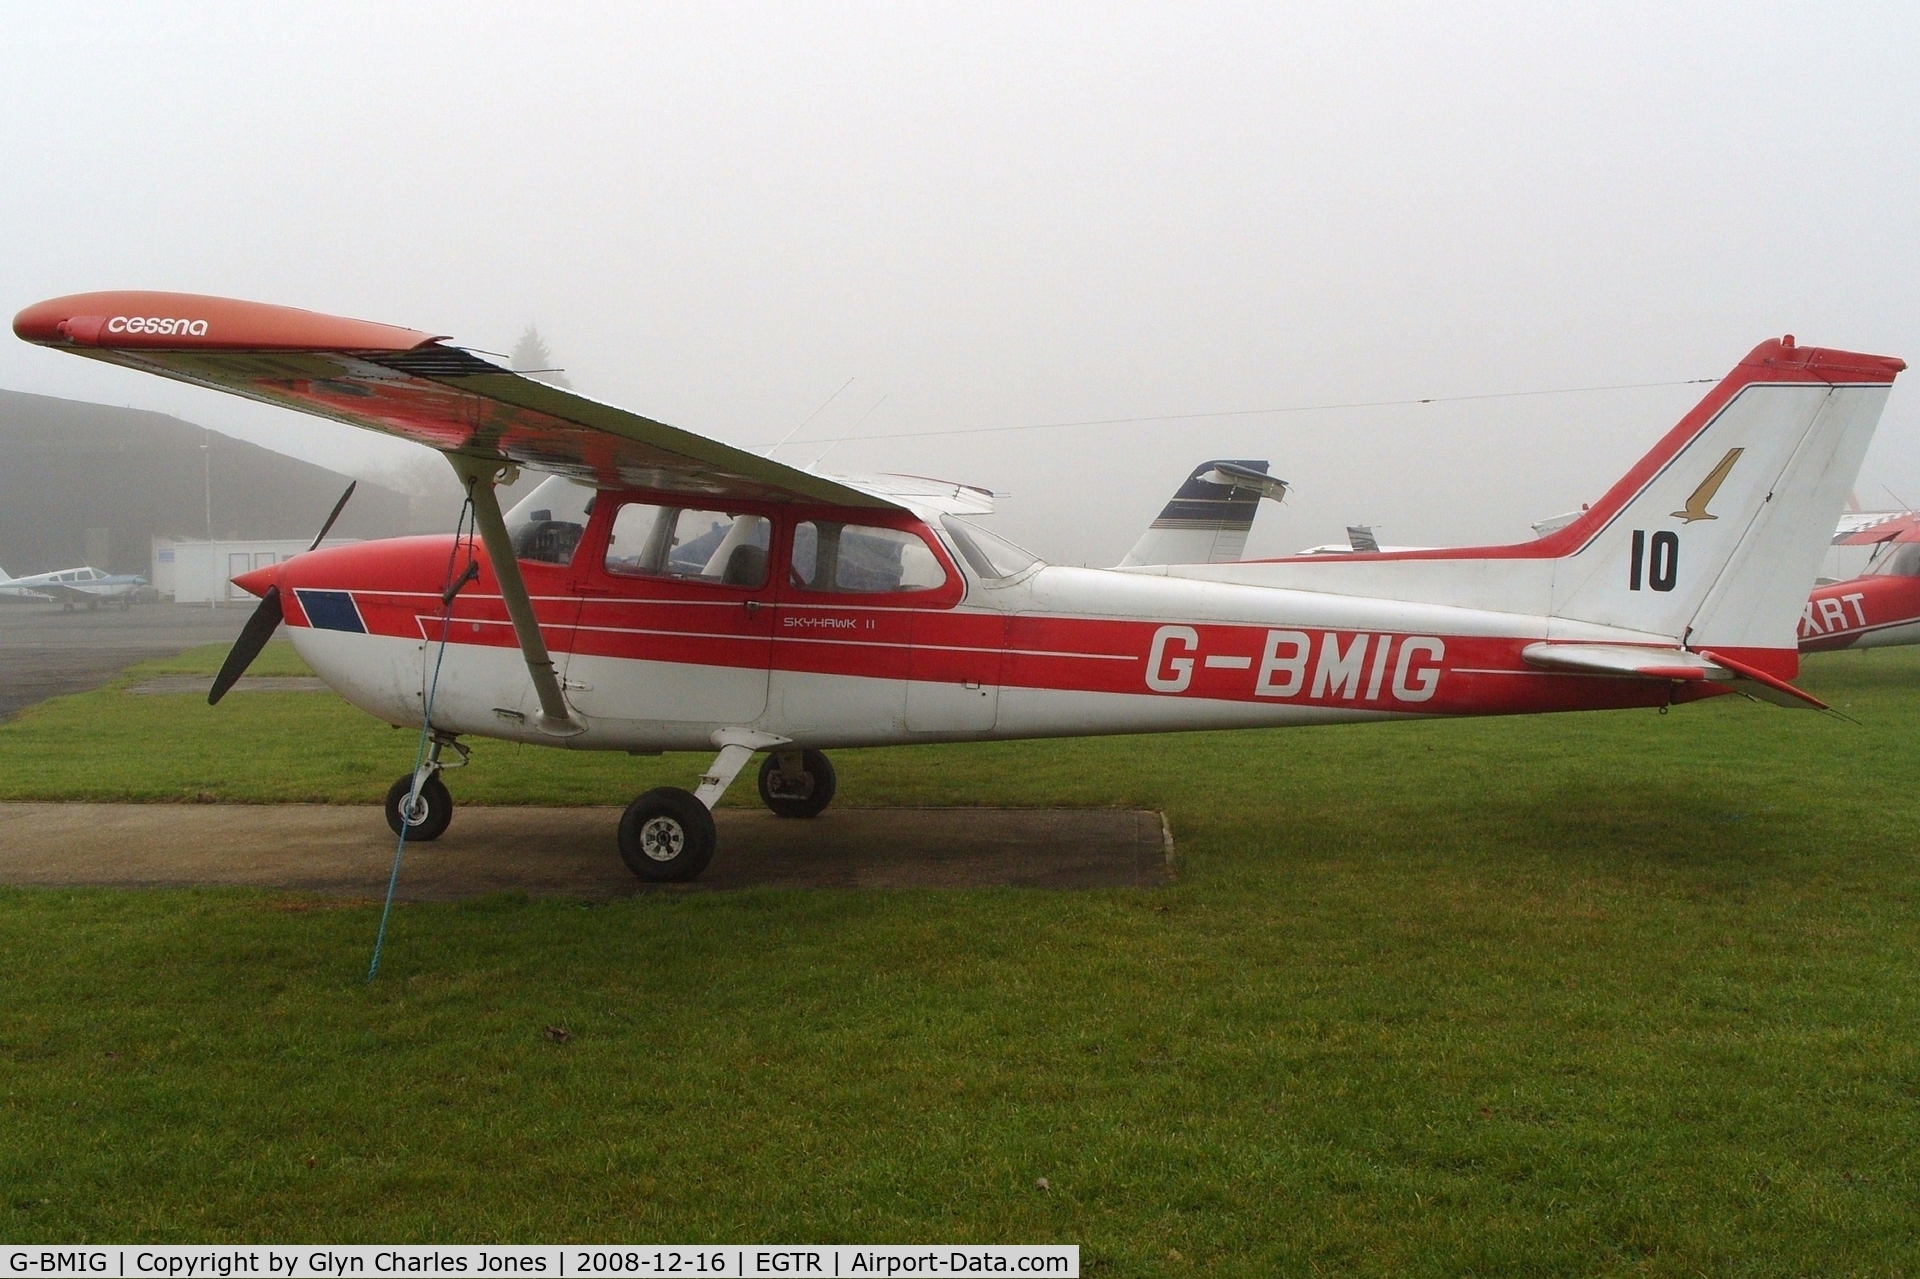 G-BMIG, 1979 Cessna 172N Skyhawk C/N 172-72376, Taken on a quiet cold and foggy day. With thanks to Elstree control tower who granted me authority to take photographs on the aerodrome. Previously ZS-KGI. Owned by BMIG Group c/o Firecrest Aviation. Sporting '10'.